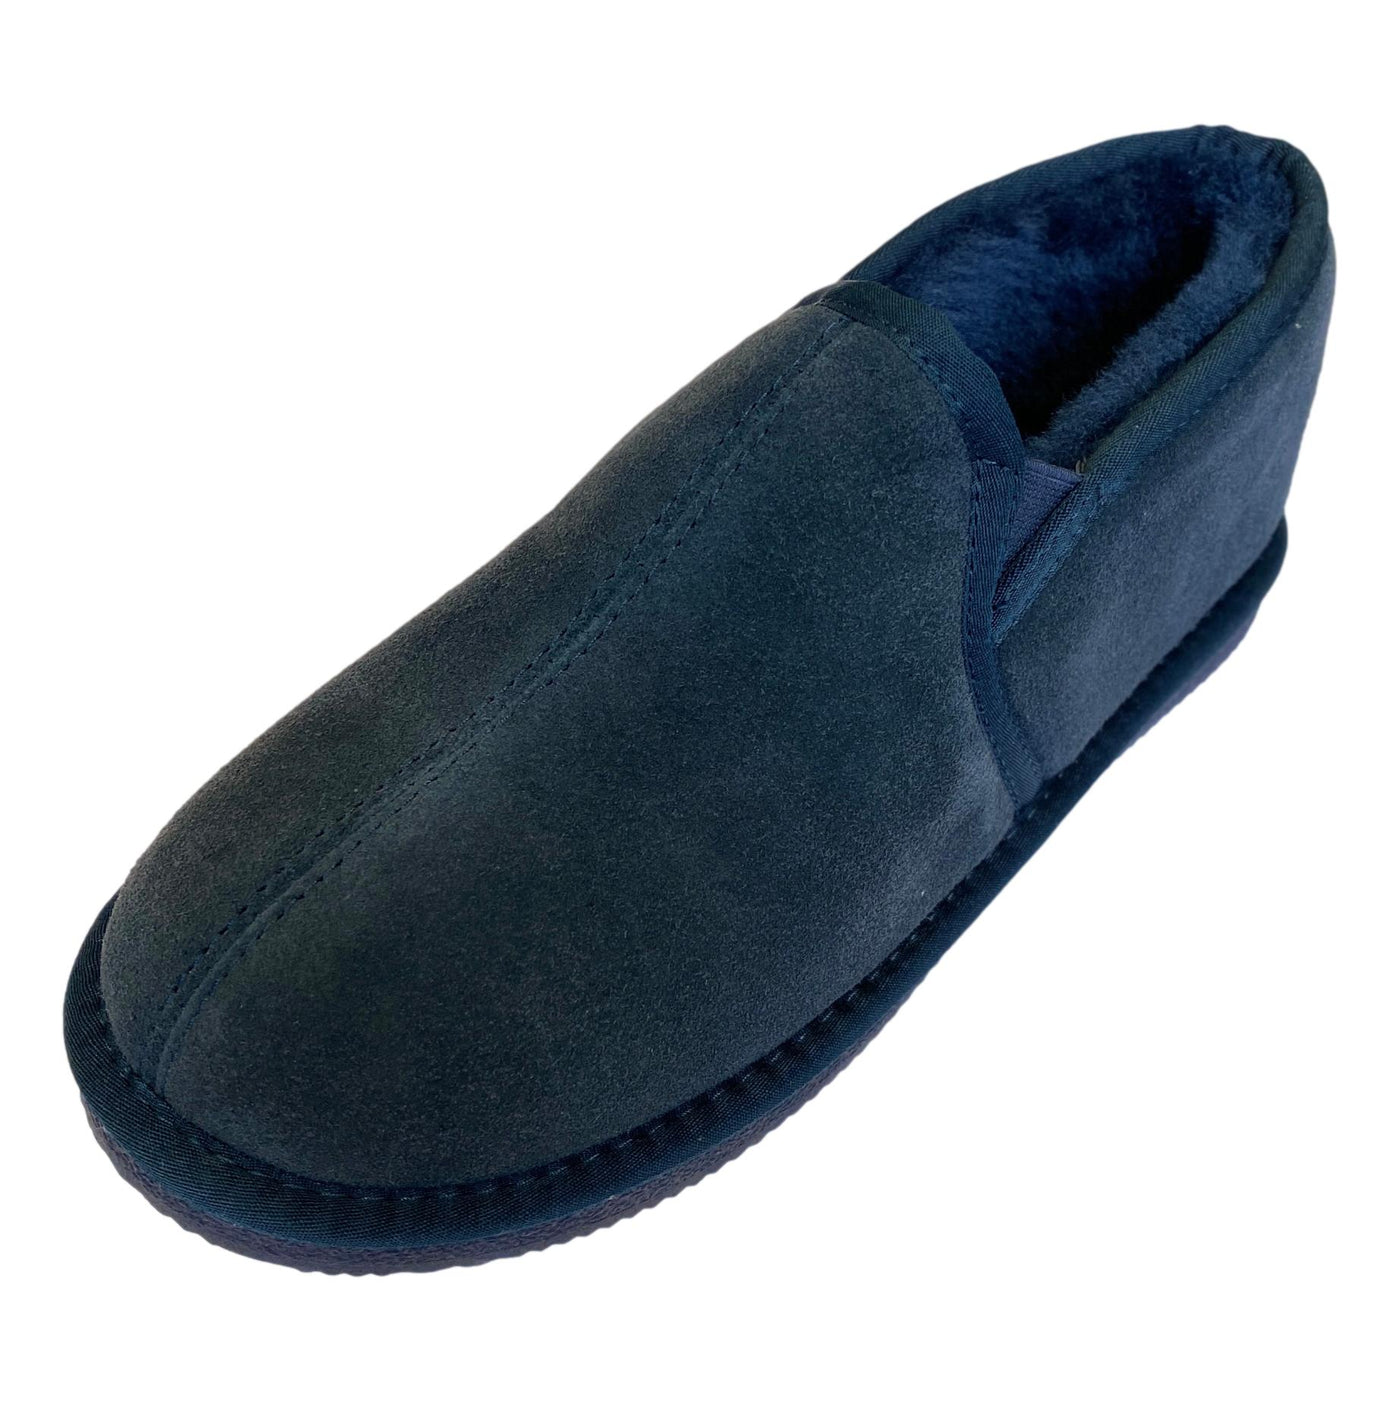 Deluxe Mens 'Sam' Sheepskin Slippers with Hard Sole - Navy